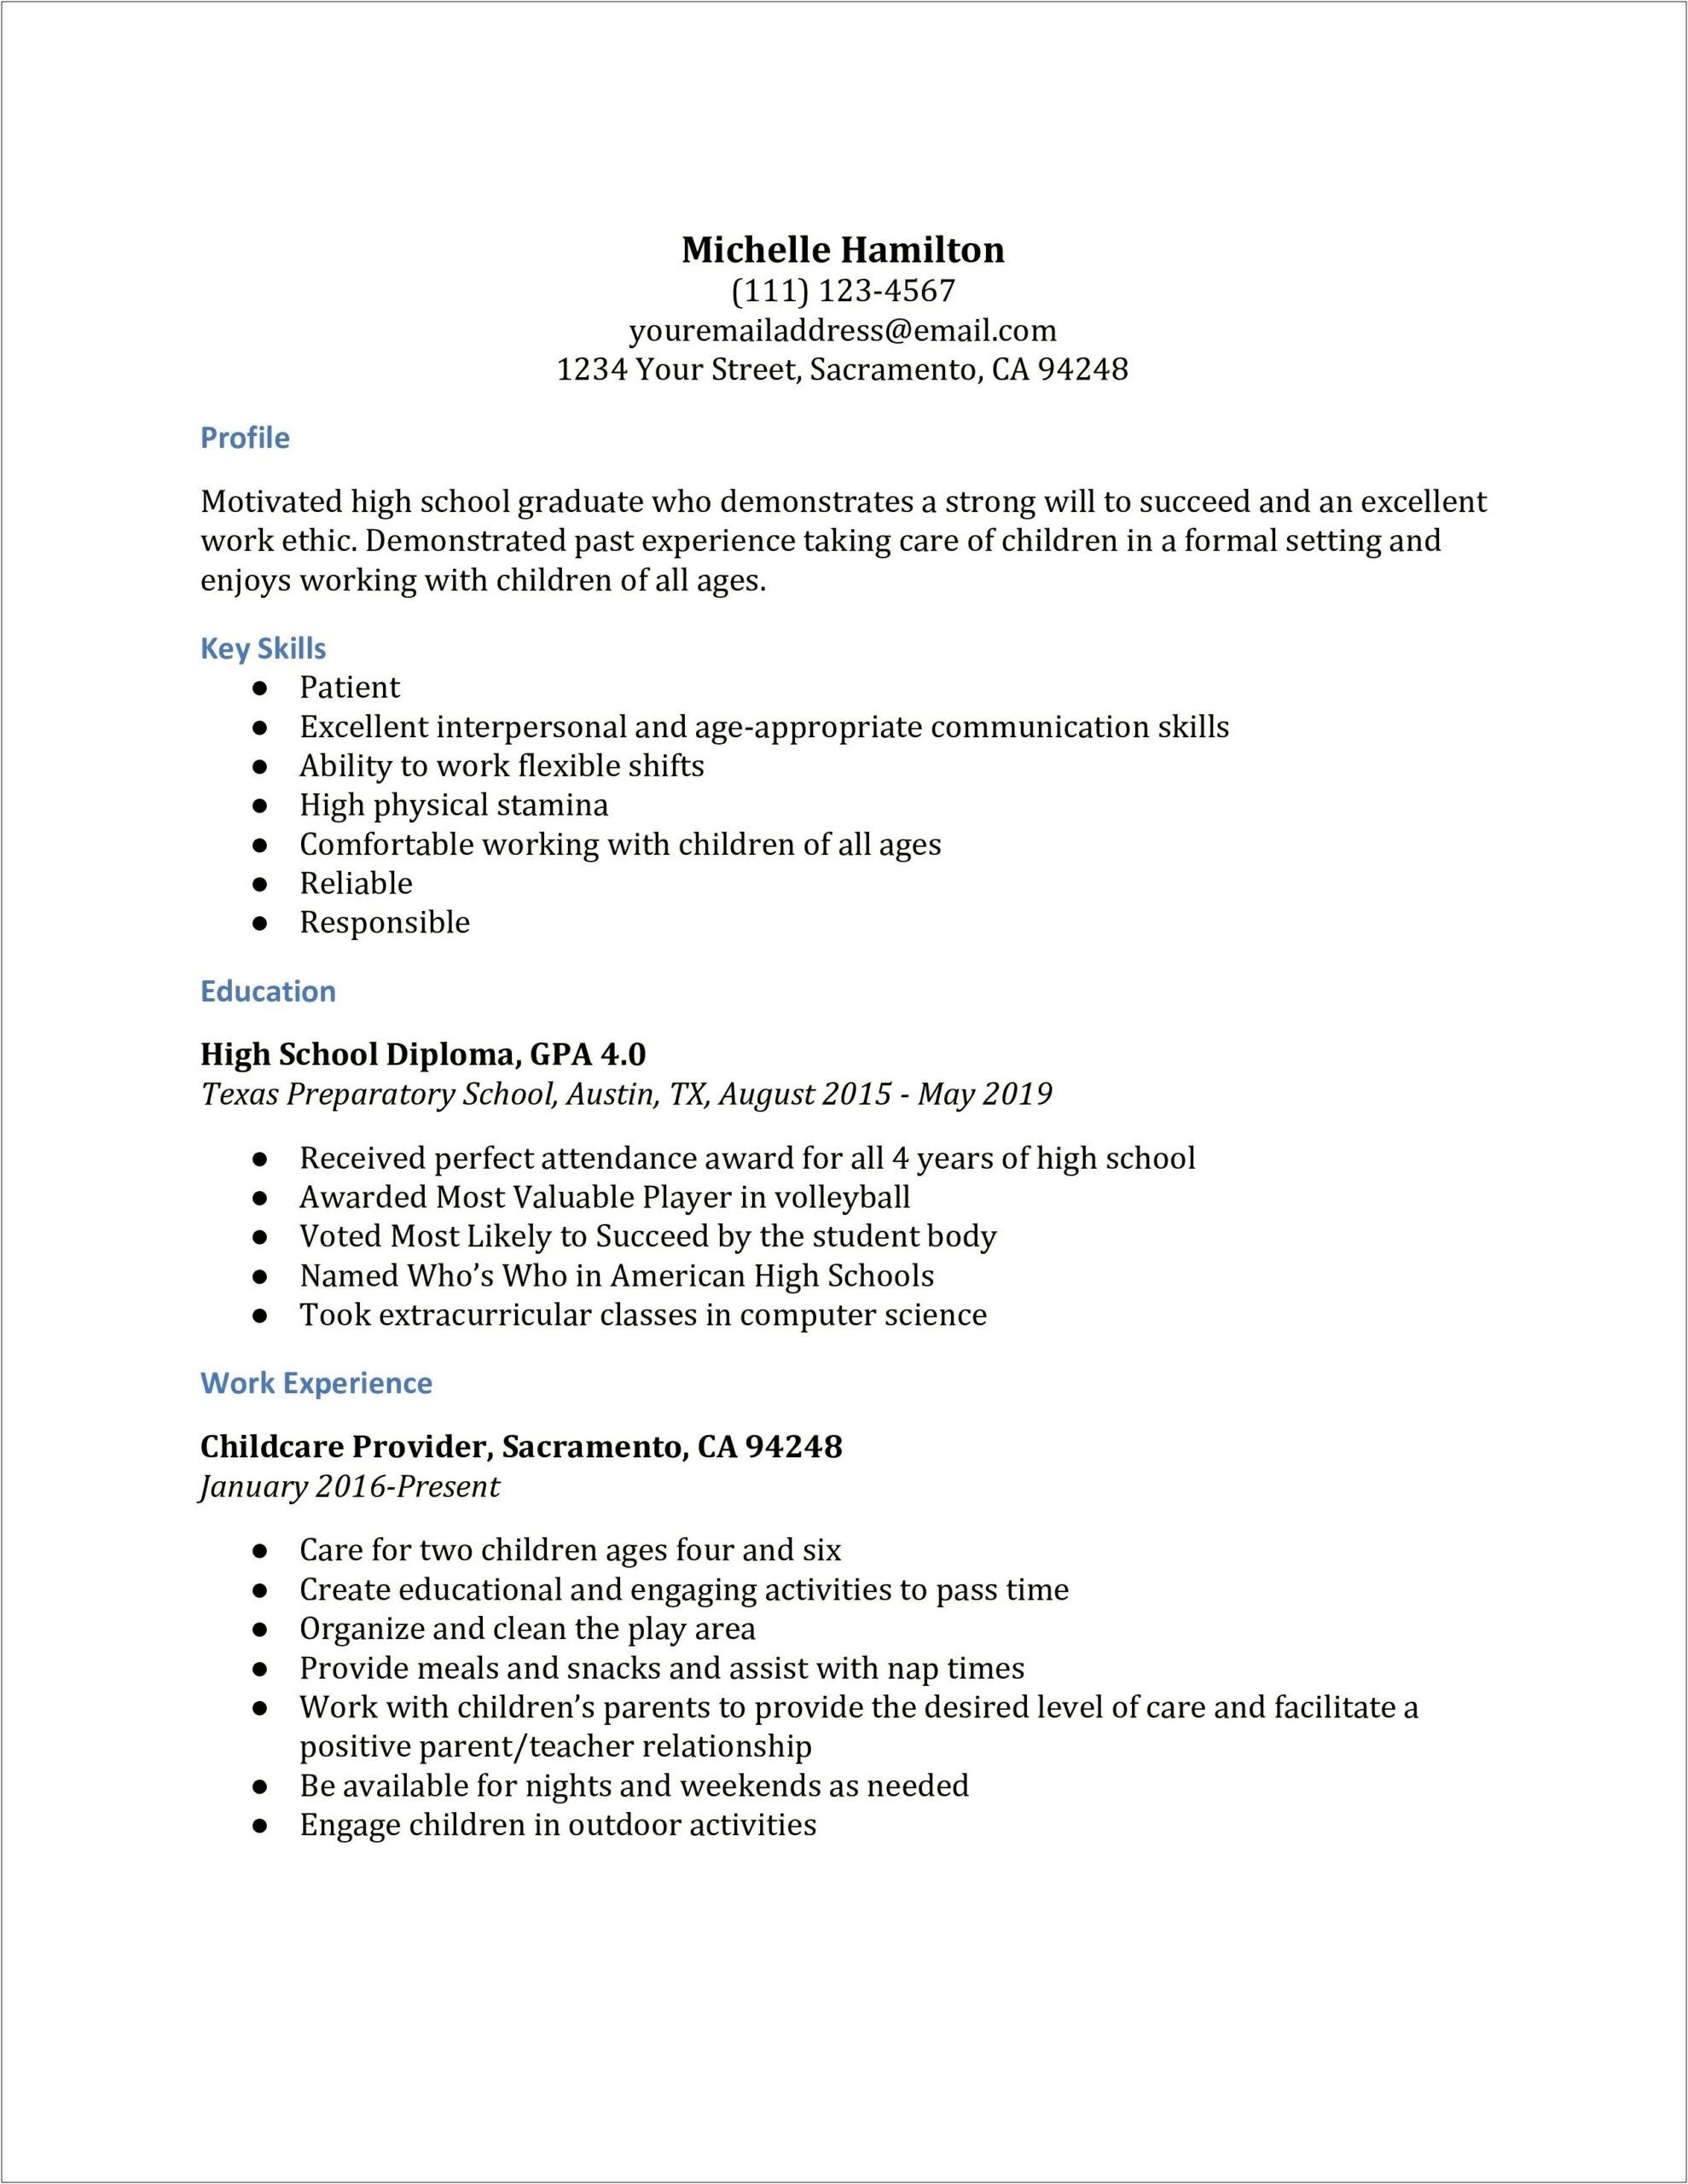 General Resume Objective Examples For Highschool Graduate